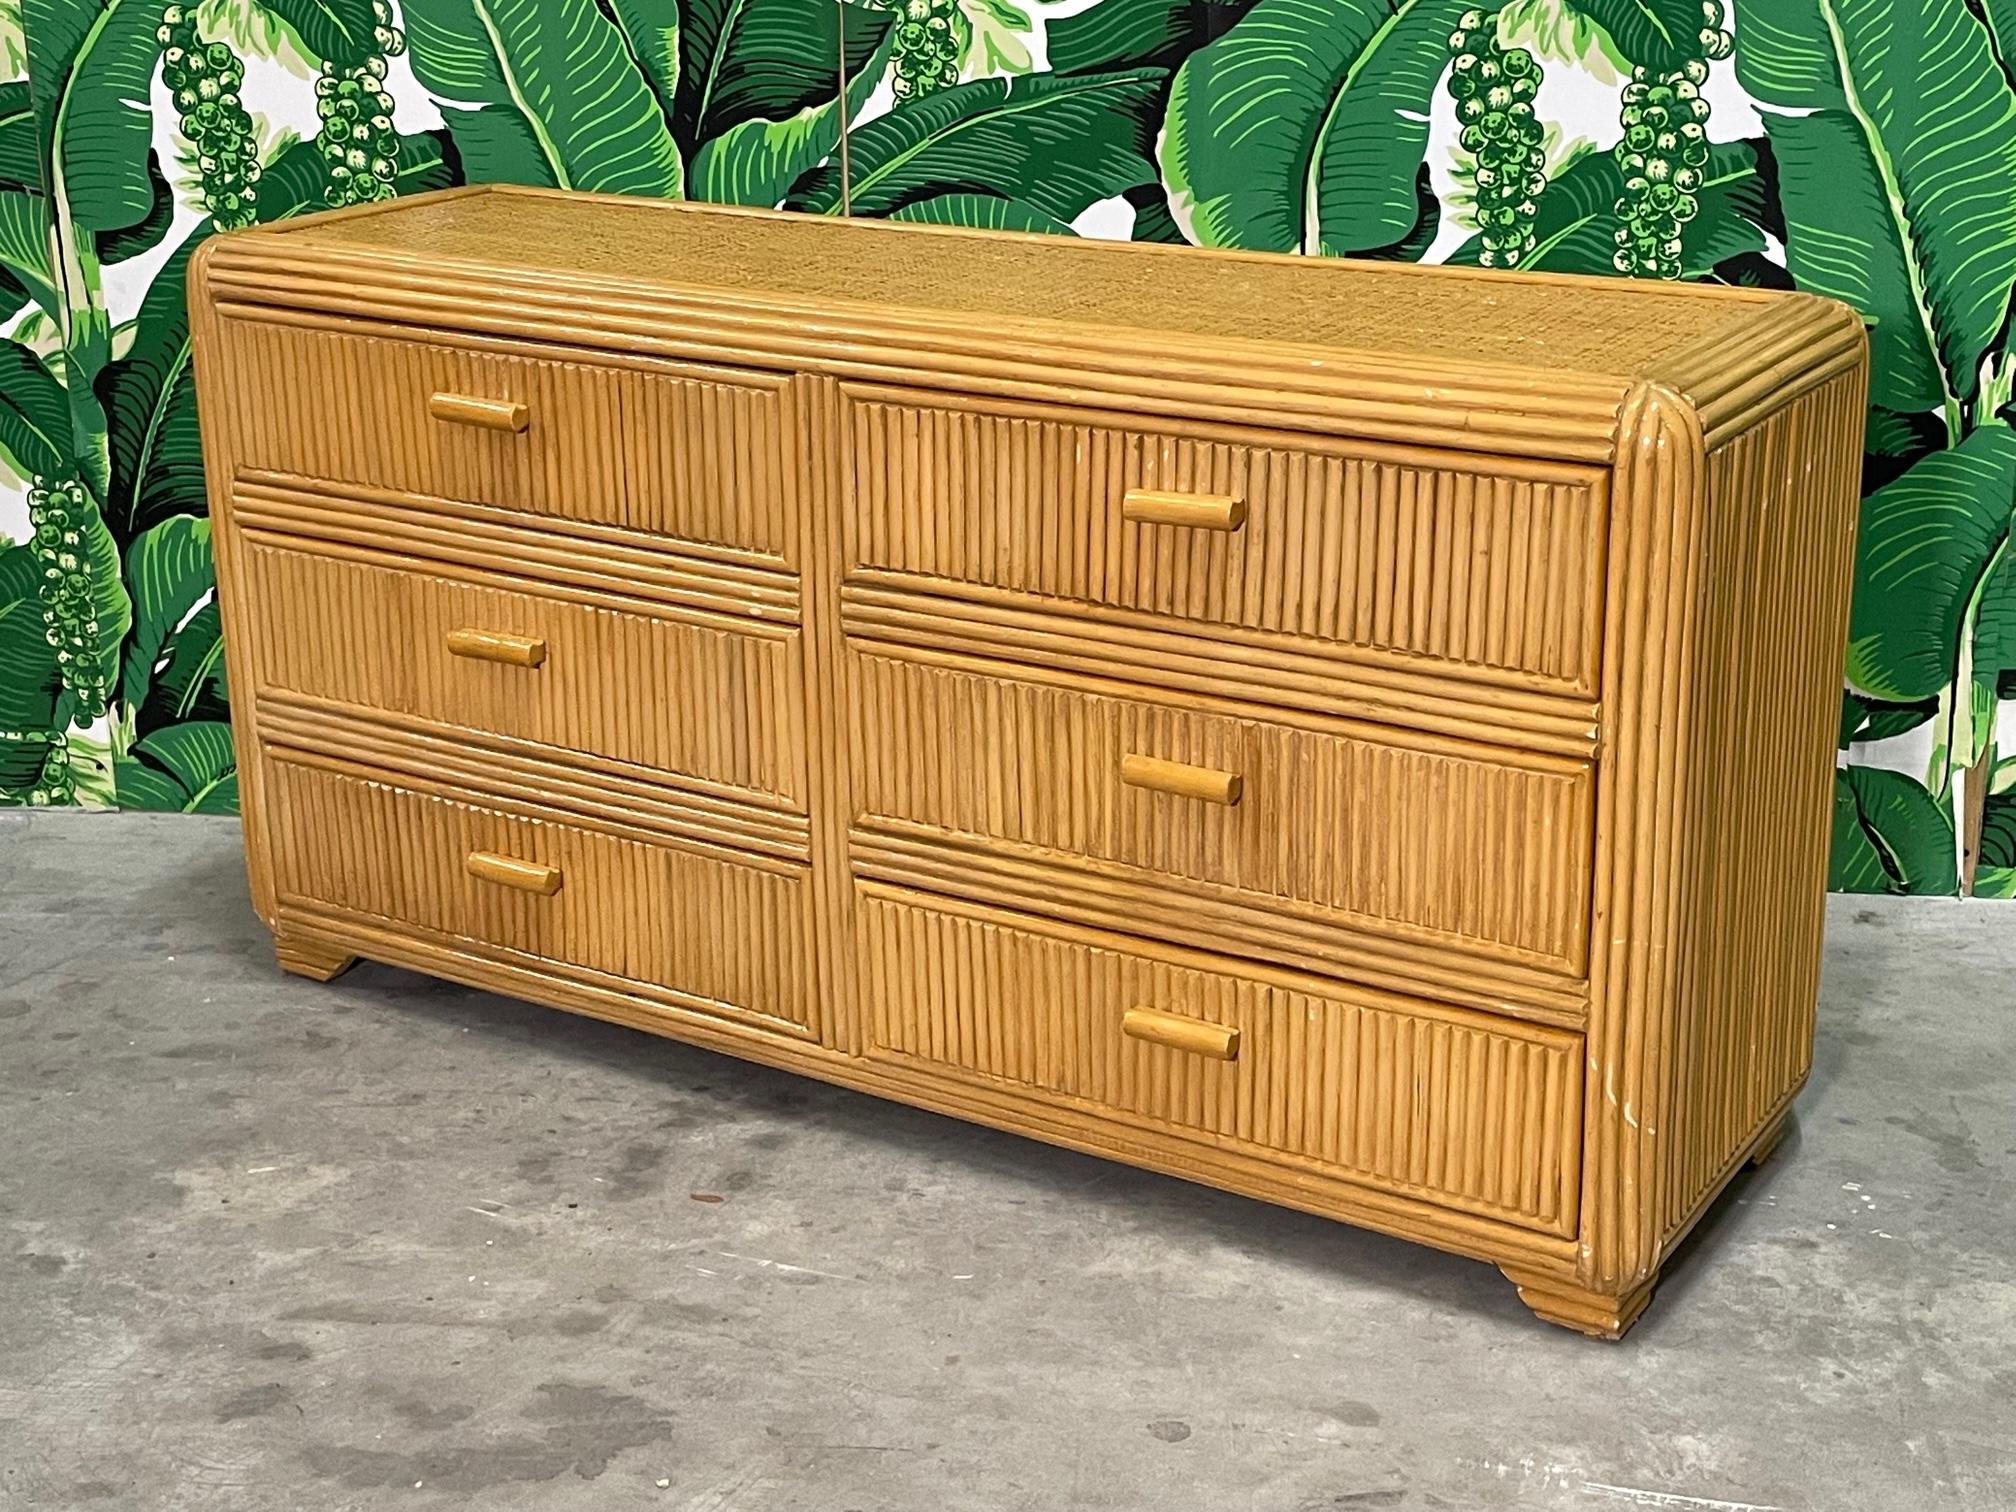 Split reed rattan veneered double dresser features a beautiful blonde finish and will add a perfect touch of organic modern style to any room. Good vintage condition with minor imperfections consistent with age (see photos).

 